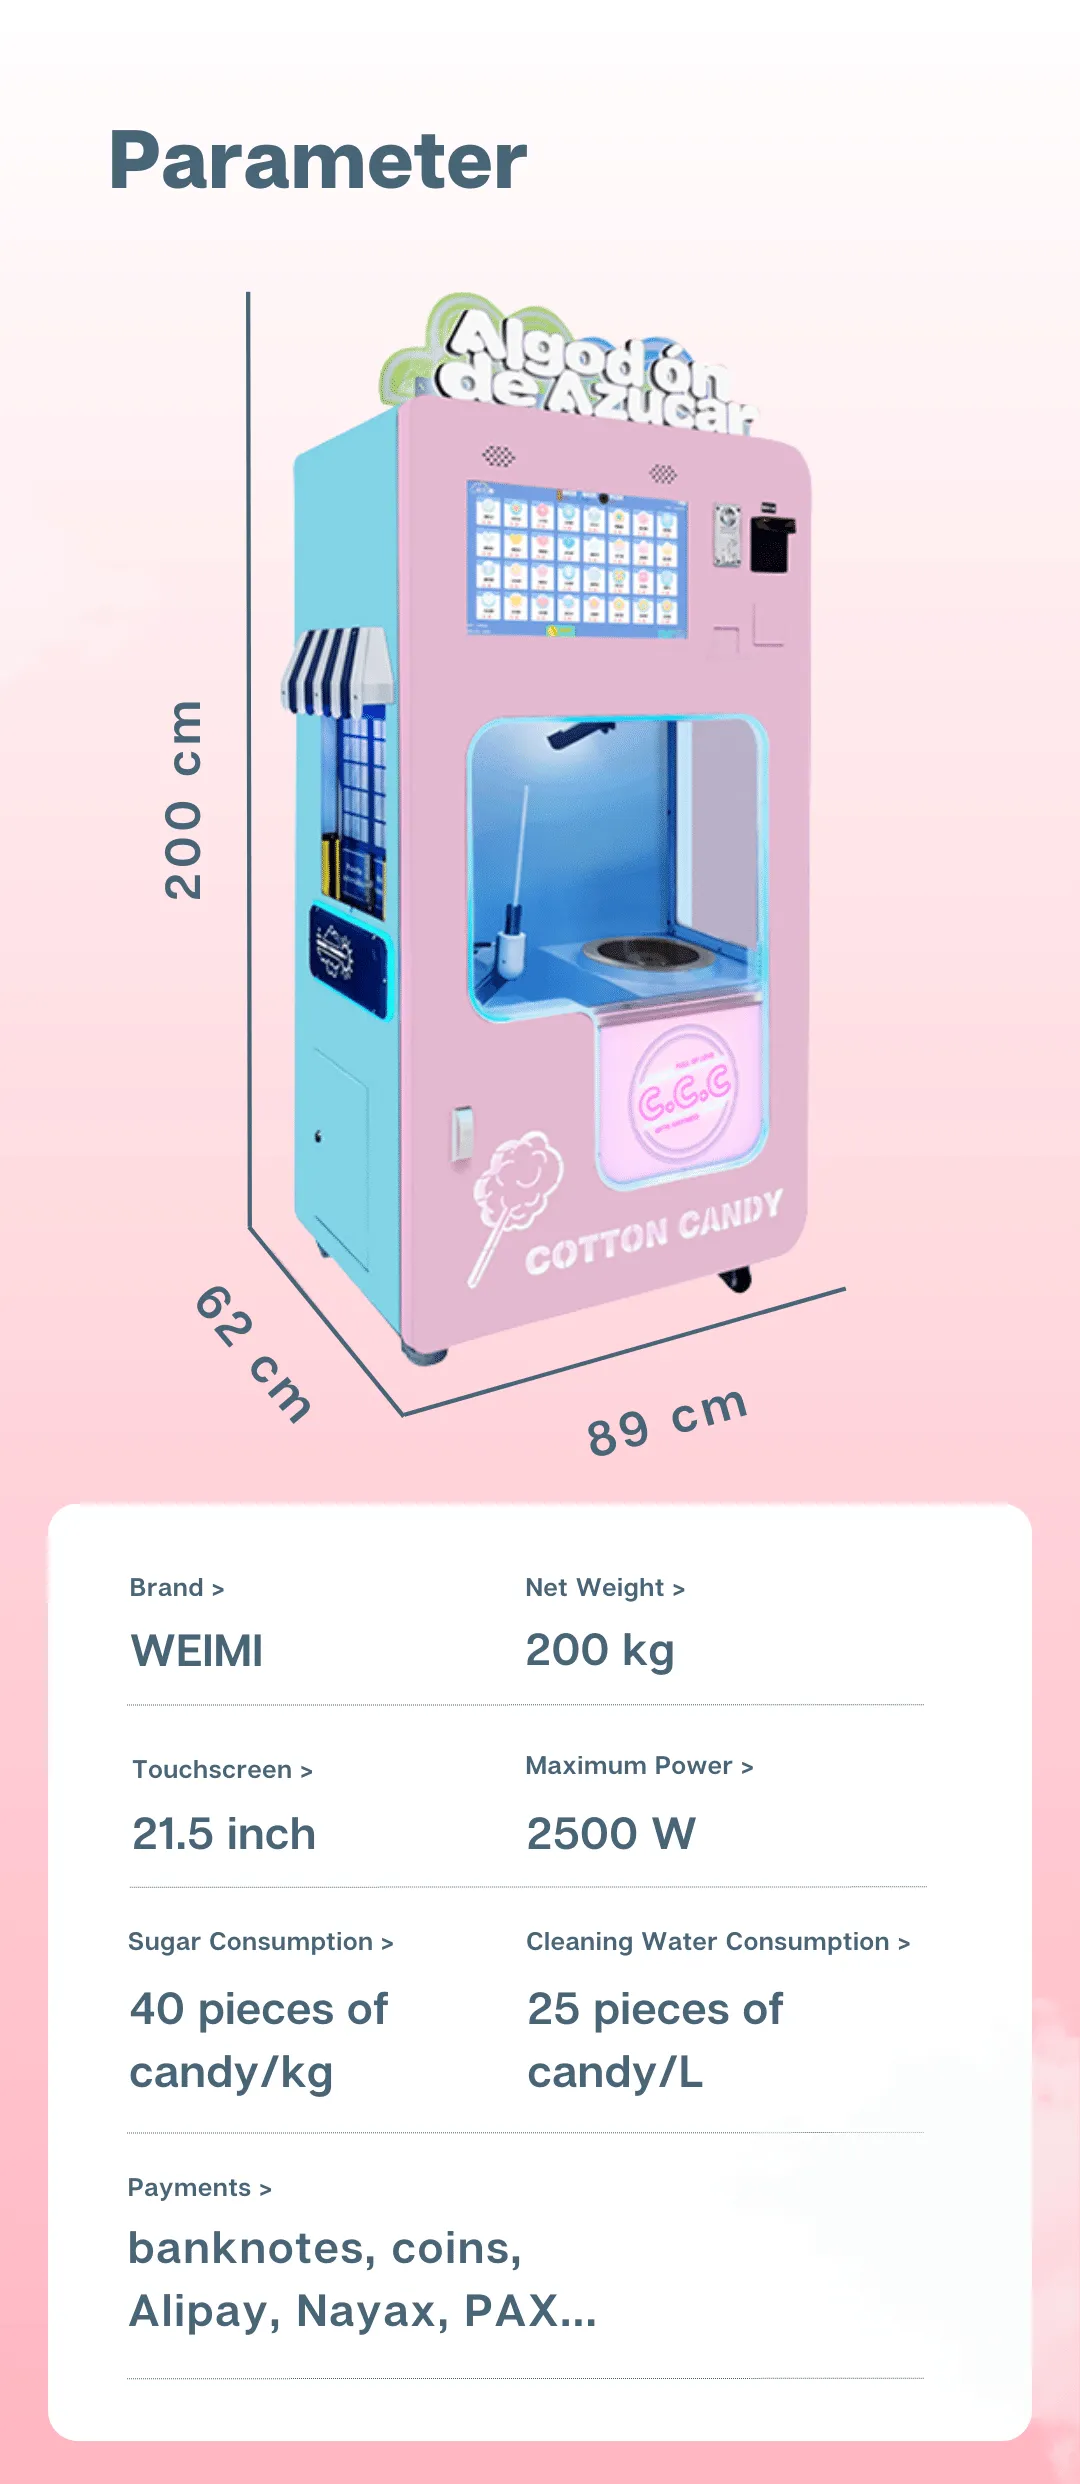 Commercial Full Automatic Cotton Candy Machine DIY Candy Floss Vending Machine OEM service available parameter